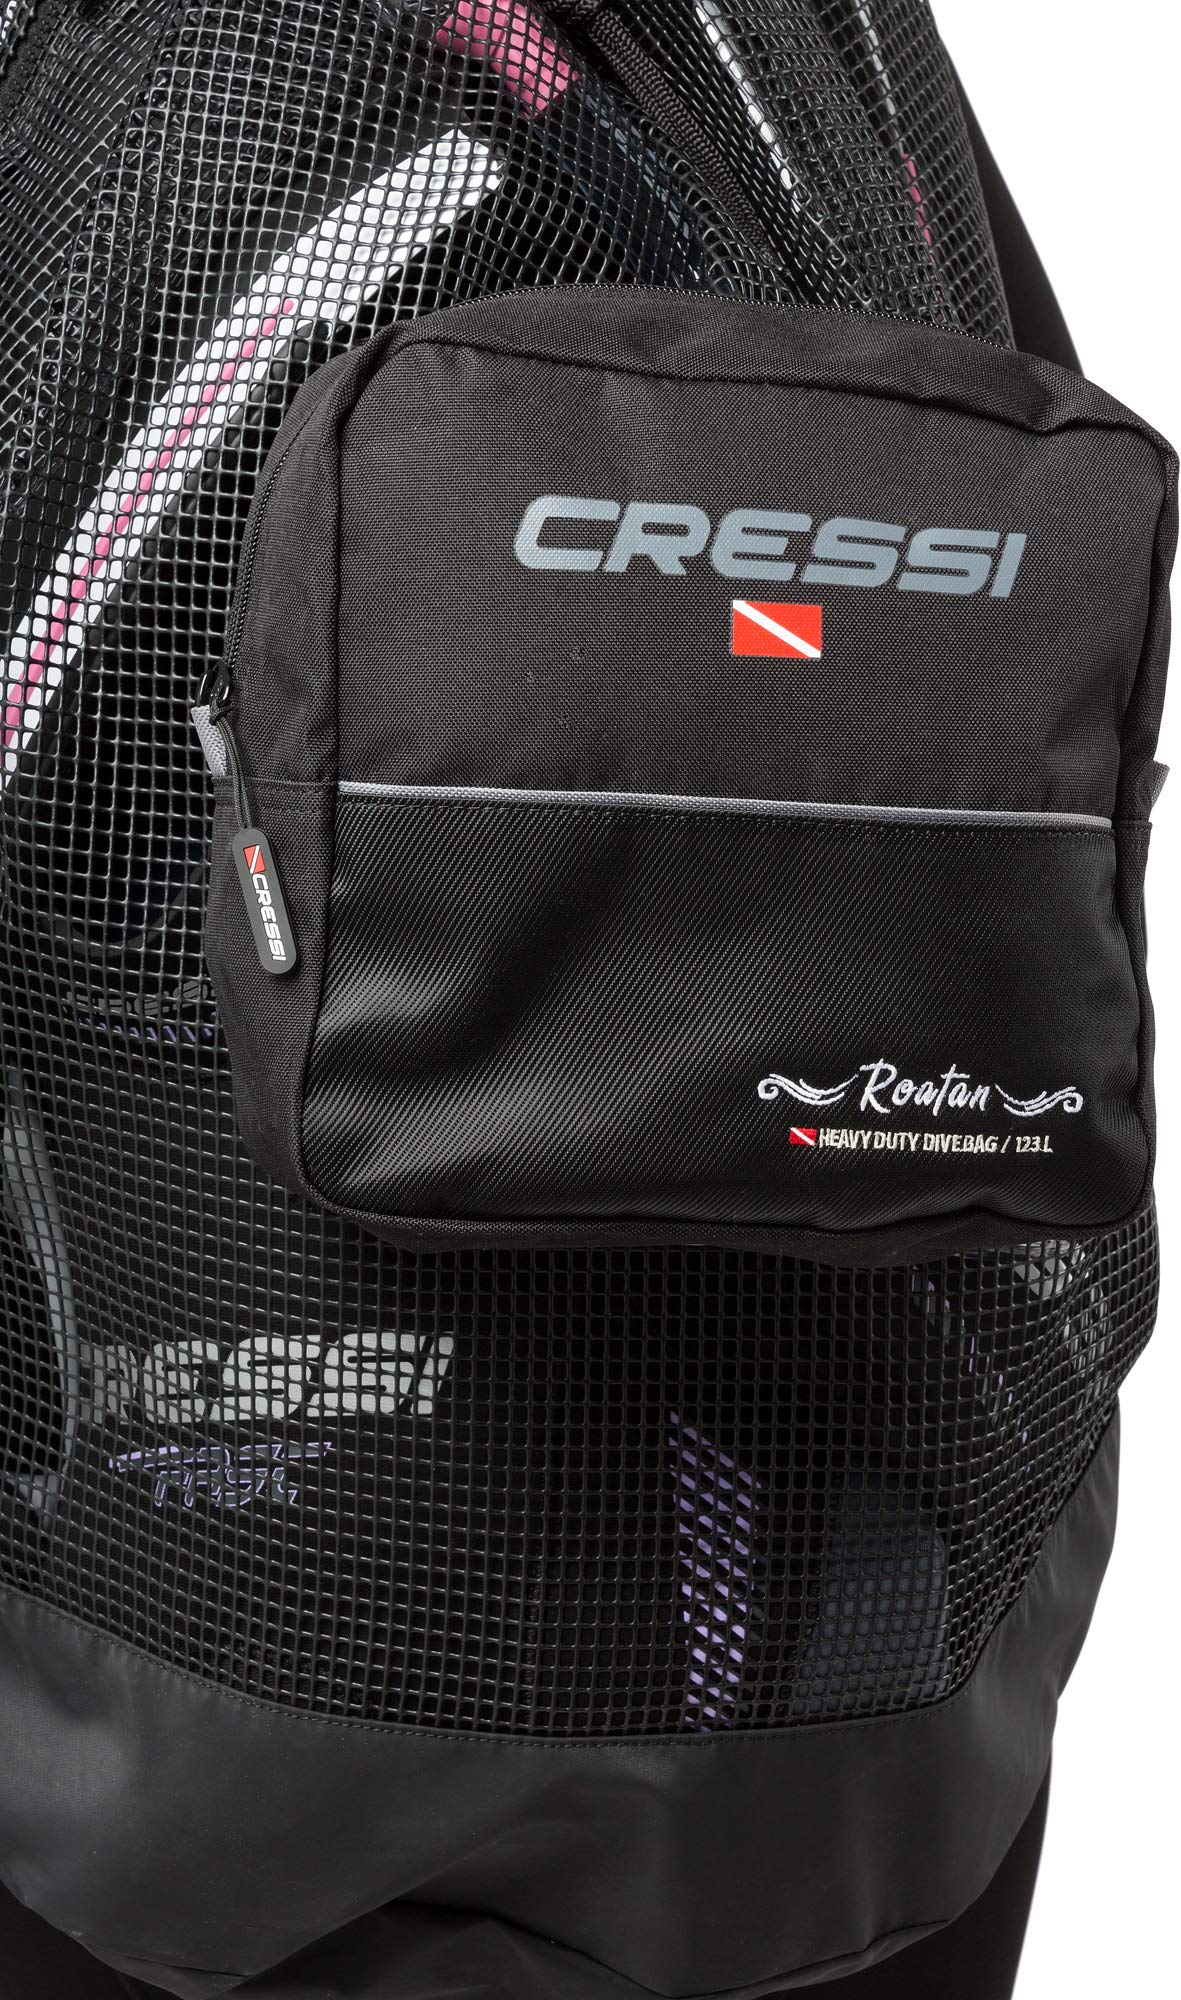 Cressi Heavy Duty Mesh Backpack 90 liters Capacity for Scuba Diving, Water Sport Gear | Roatan: designed in Italy, Black, One Size (UB936000)